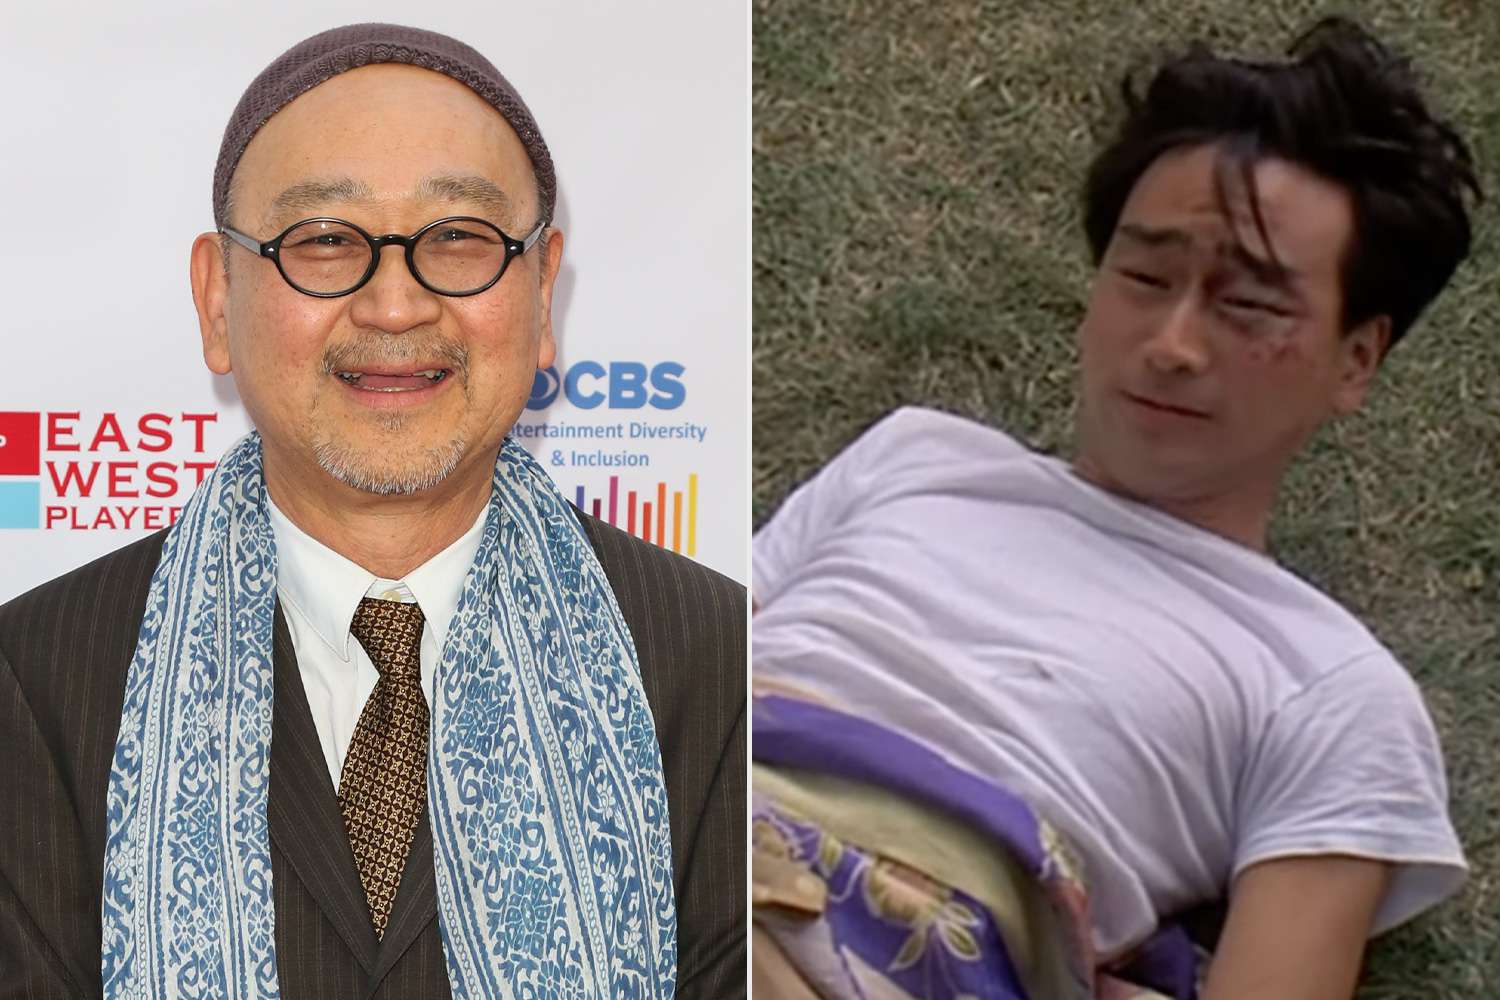 Gedde Watanabe Says He Didn't Find His 'Sixteen Candles' Role Long Duk Dong Offensive at the Time (Exclusive)